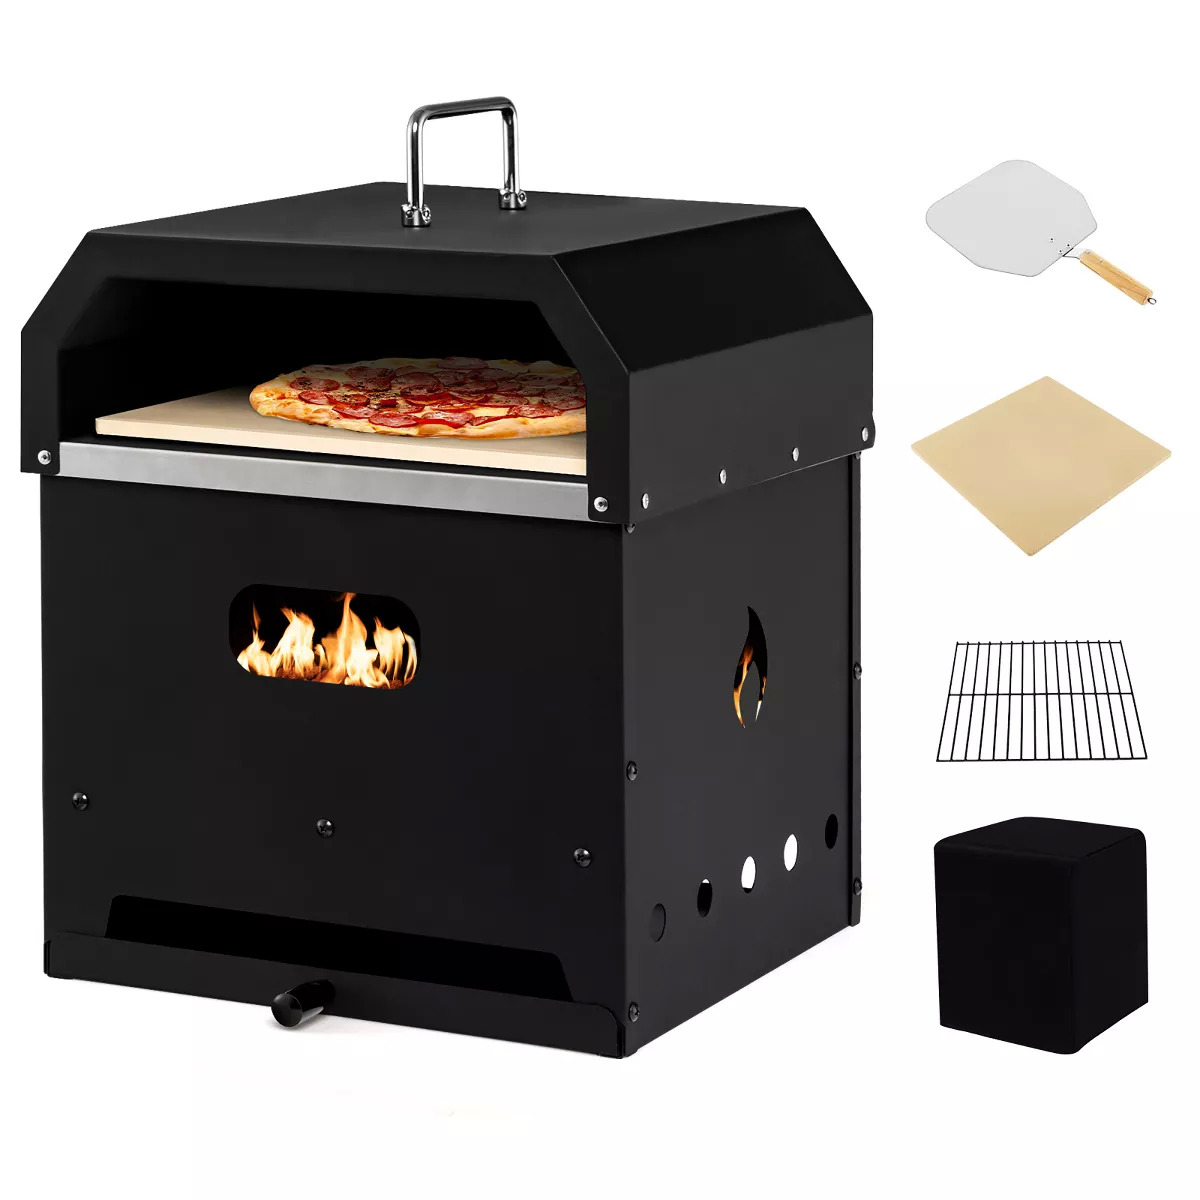 Costway 4-in-1 Multipurpose Outdoor Pizza Oven Wood Fired 2-layer Detachable Oven : Target $95.99